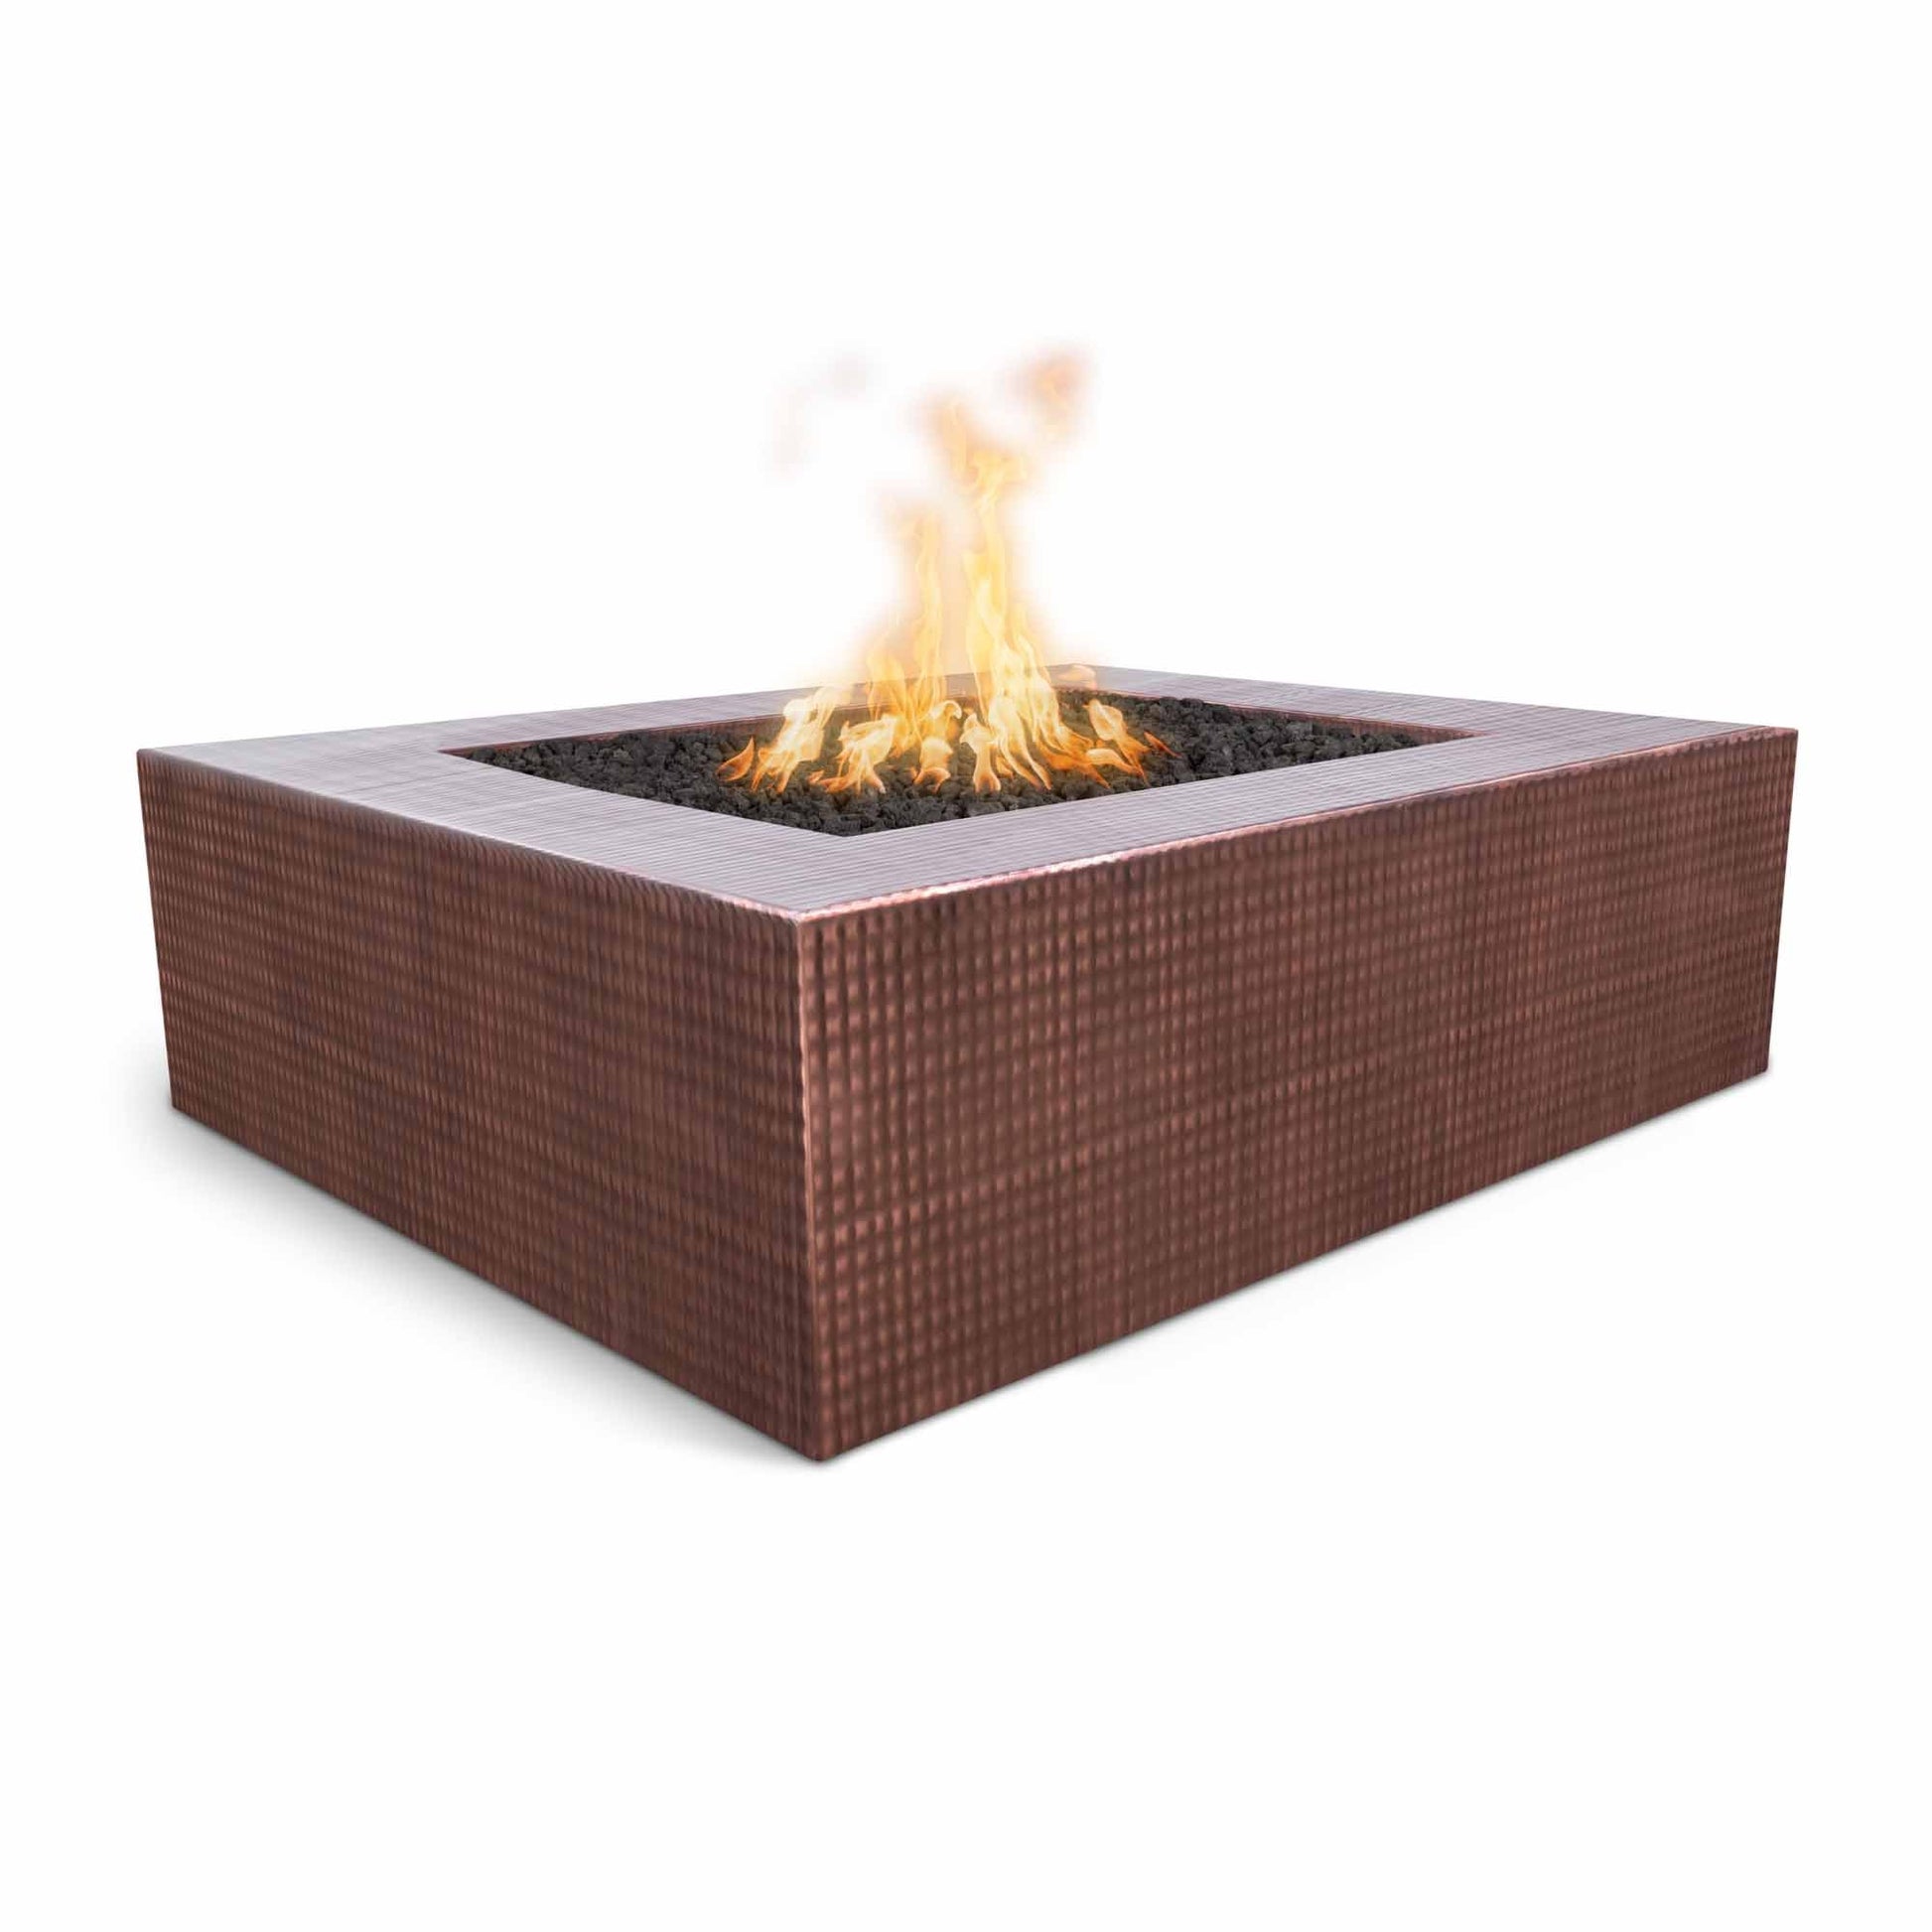 The Outdoor Plus Square Quad 36" Hammered Copper Liquid Propane Fire Pit with Match Lit Ignition